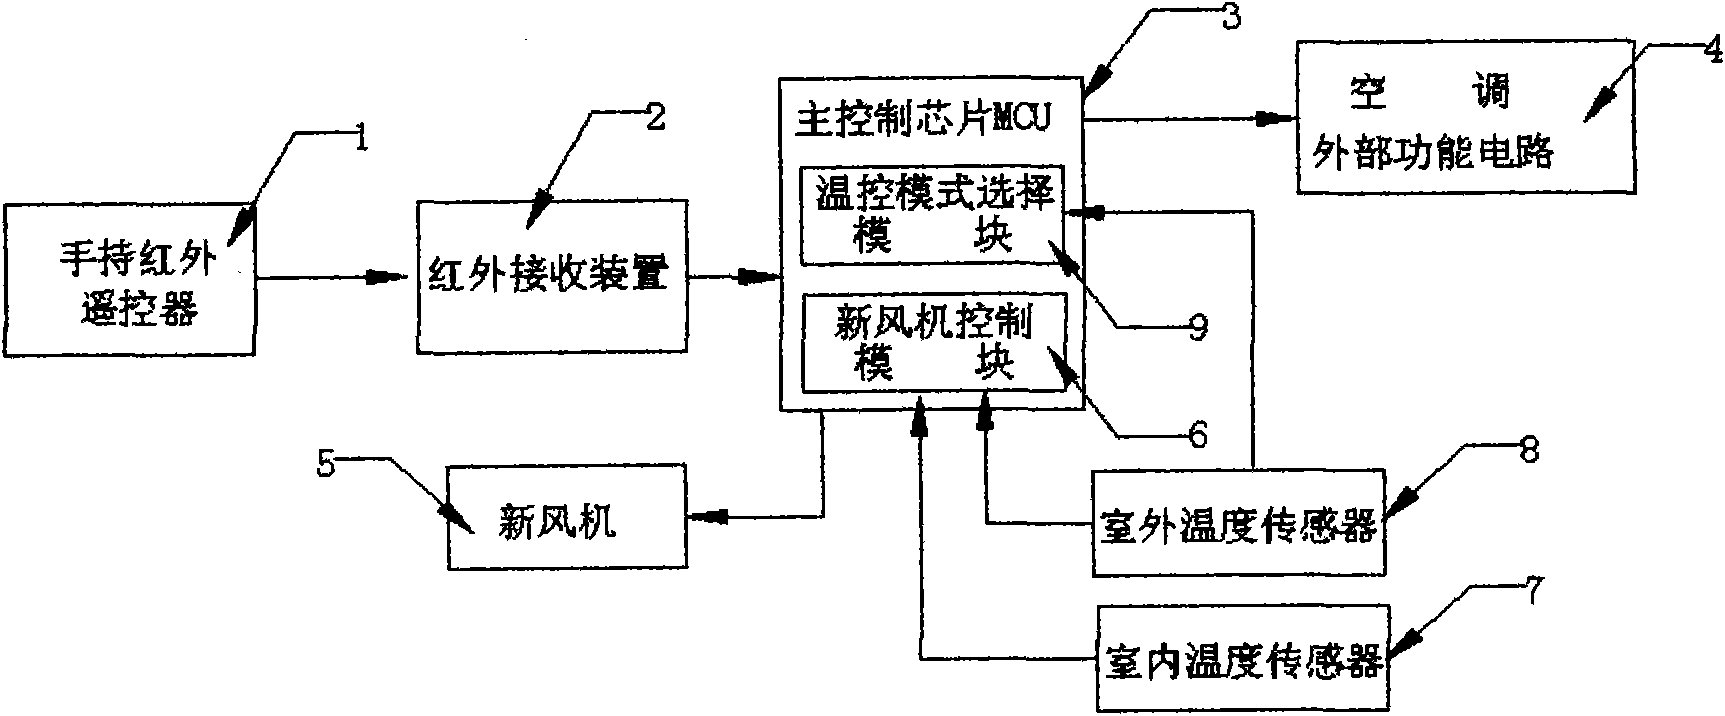 Multi-mode control method directly using outdoor cold source and air conditioner